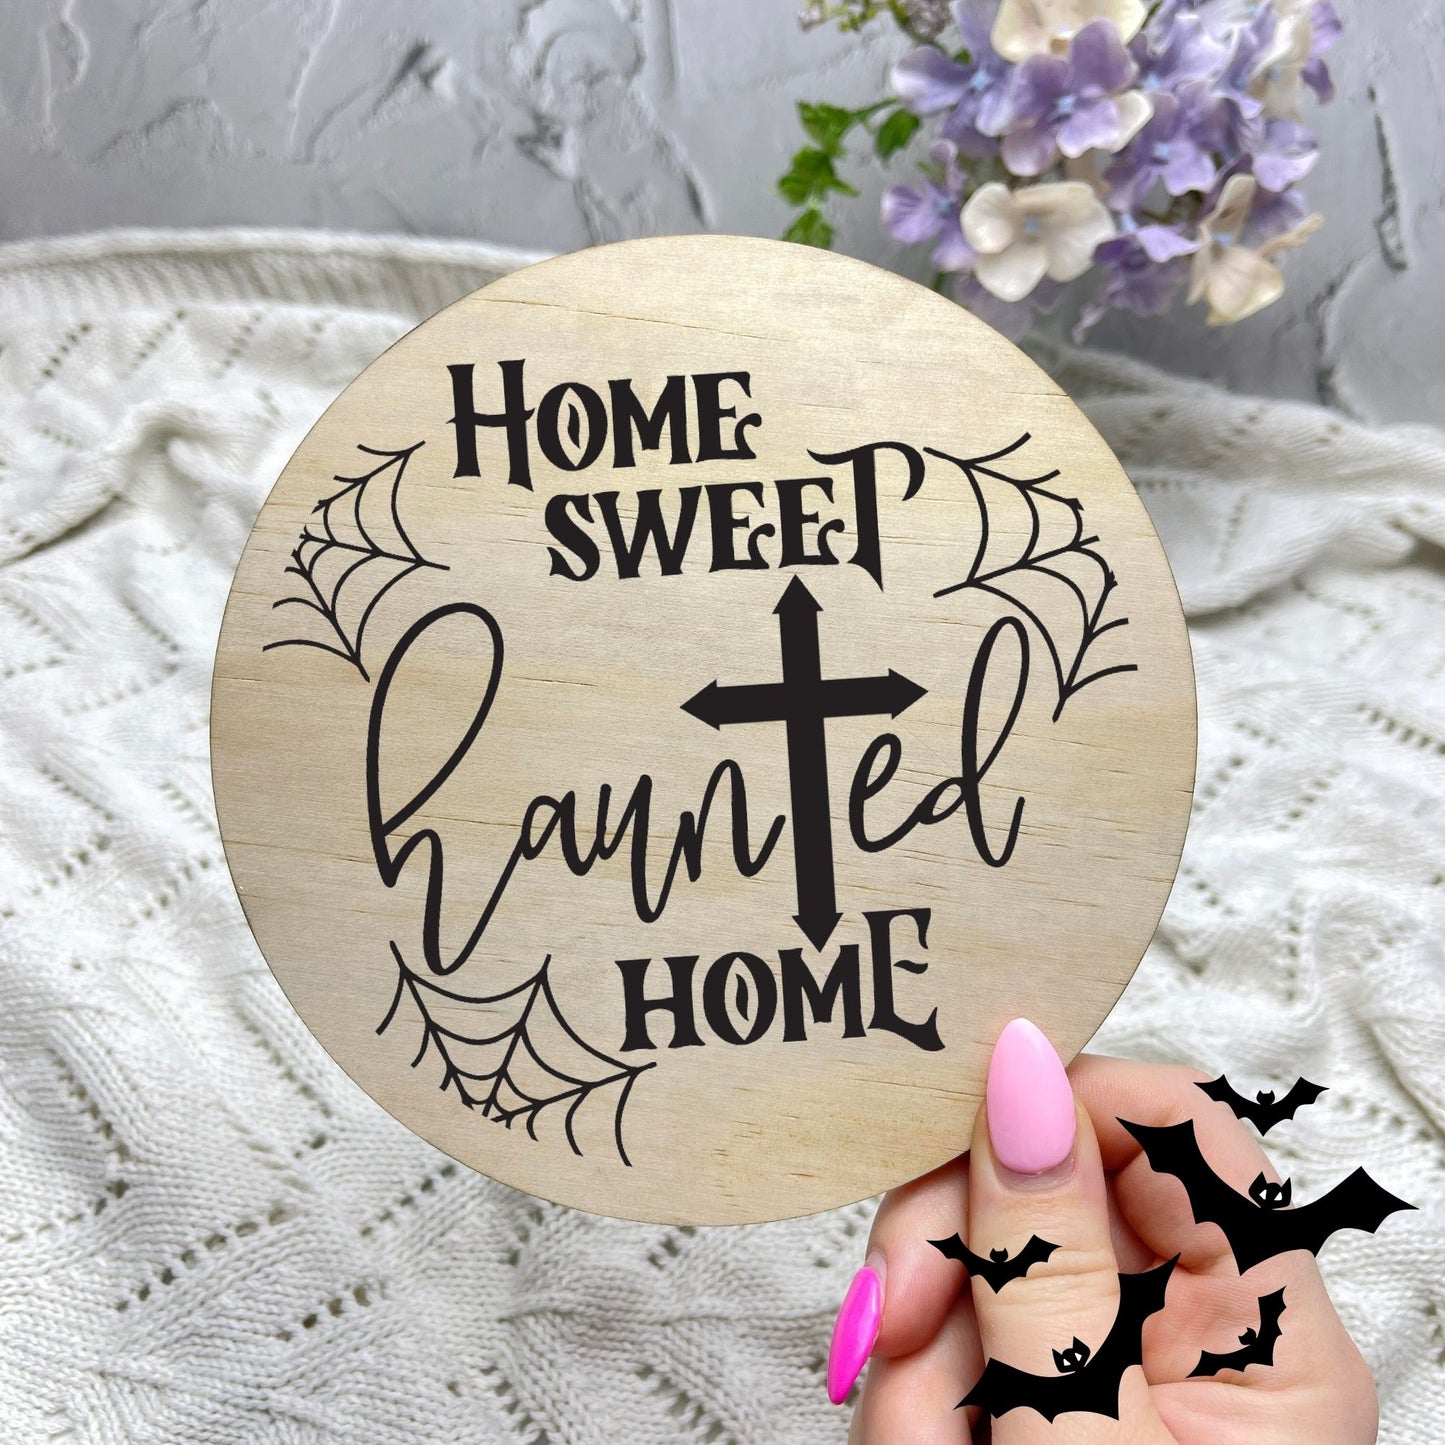 Home sweet haunted home sign, Halloween Decor, Spooky Vibes, hocus pocus sign, trick or treat decor, haunted house h33